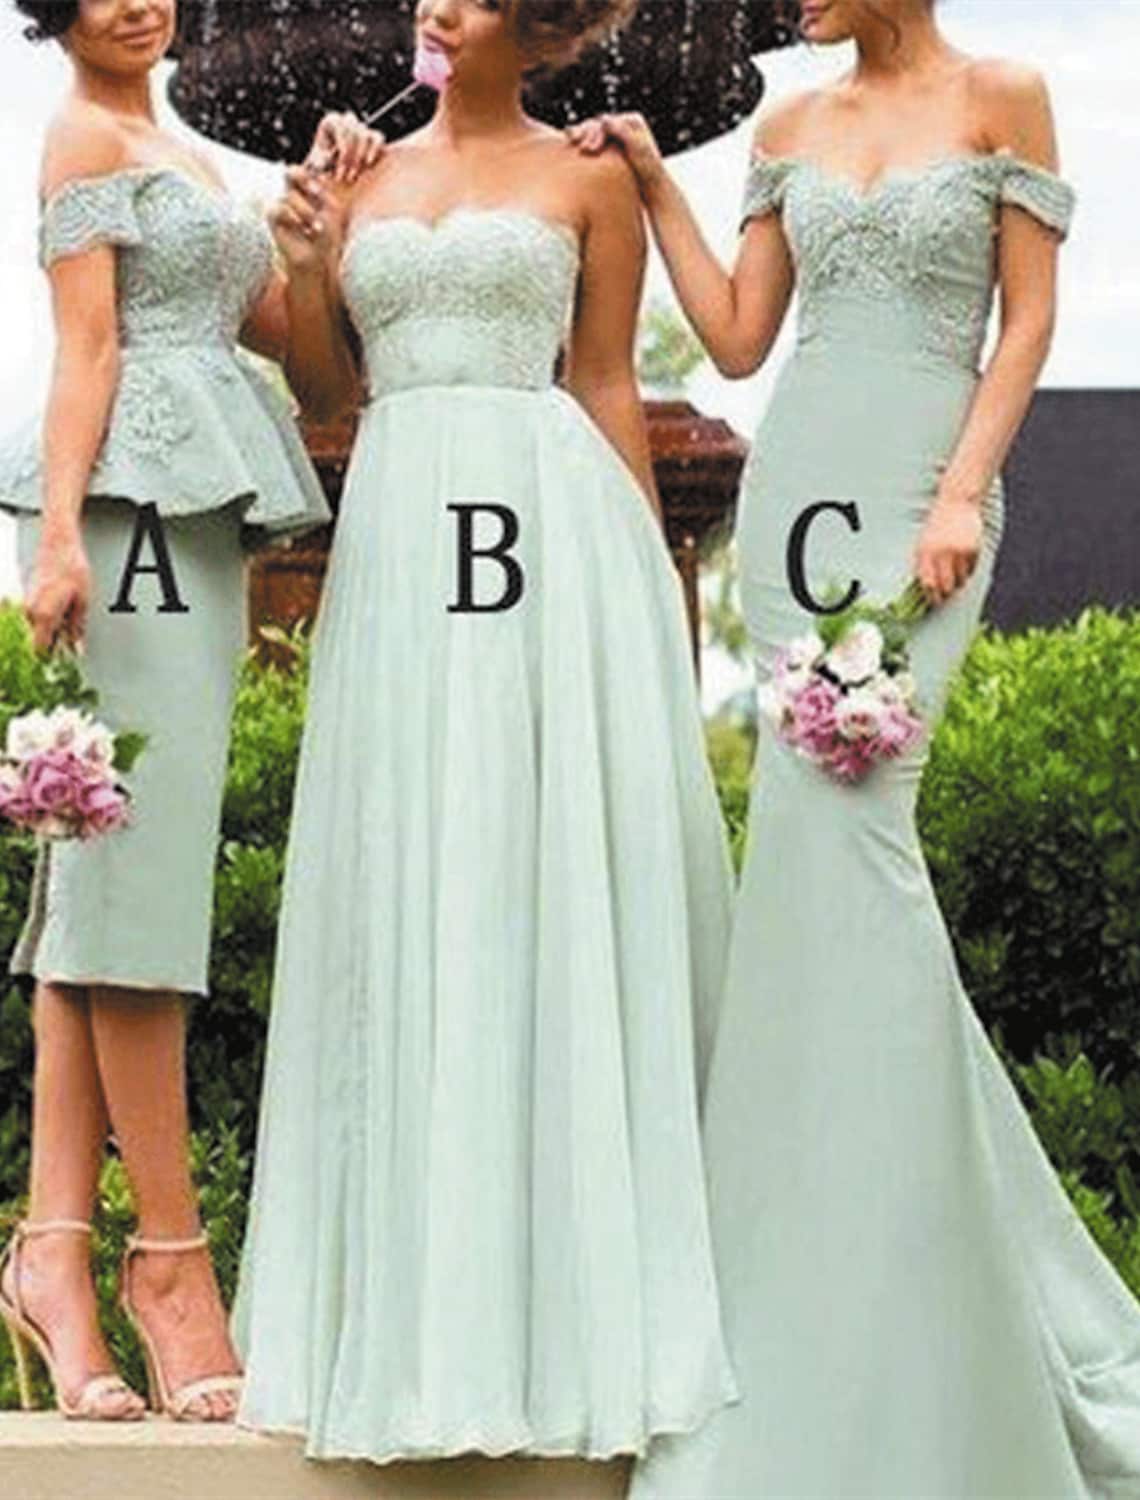 A-Line / Mermaid / Trumpet / Sheath / Column Bridesmaid Dress Off Shoulder Sleeveless Sexy Floor Length Chiffon / Lace with Lace / Appliques